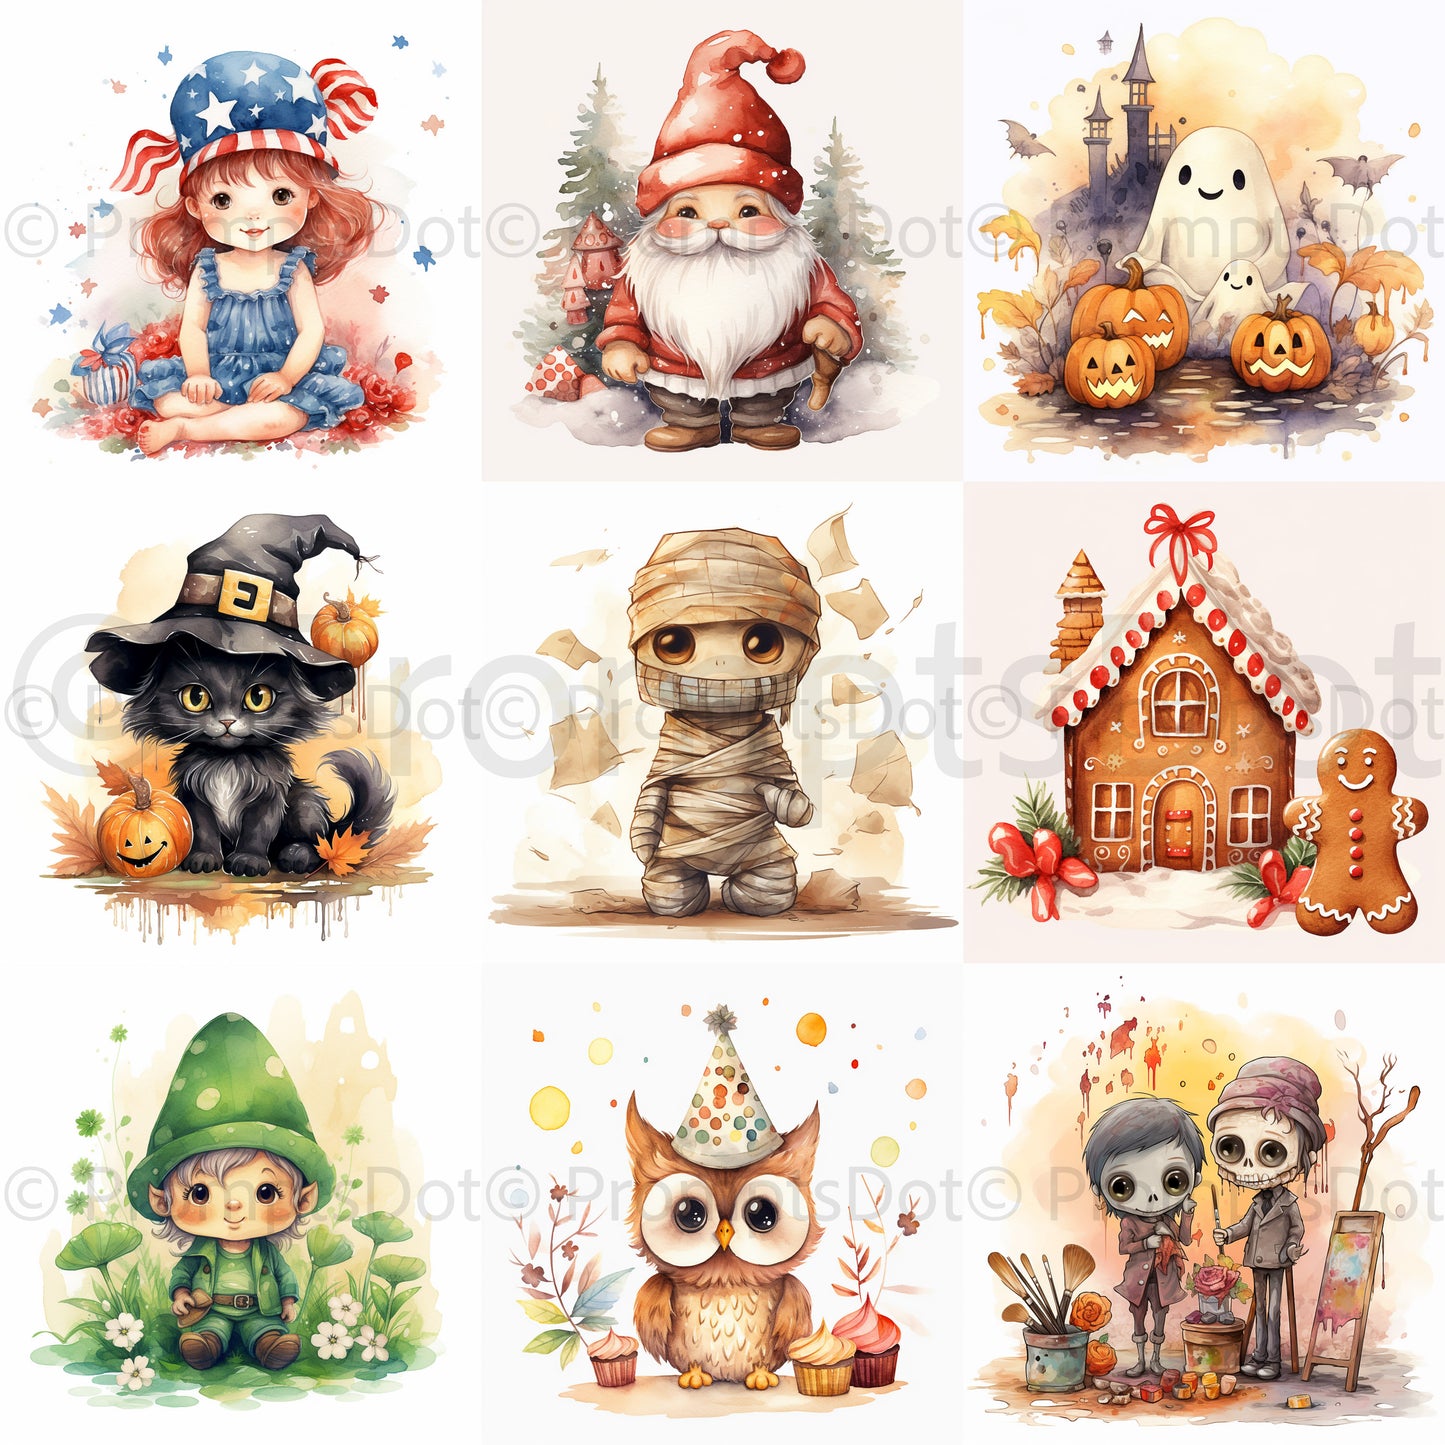 Halloween Christmas Holiday Clipart Midjourney Prompt Instant Download collection of nine holiday illustrations for kids